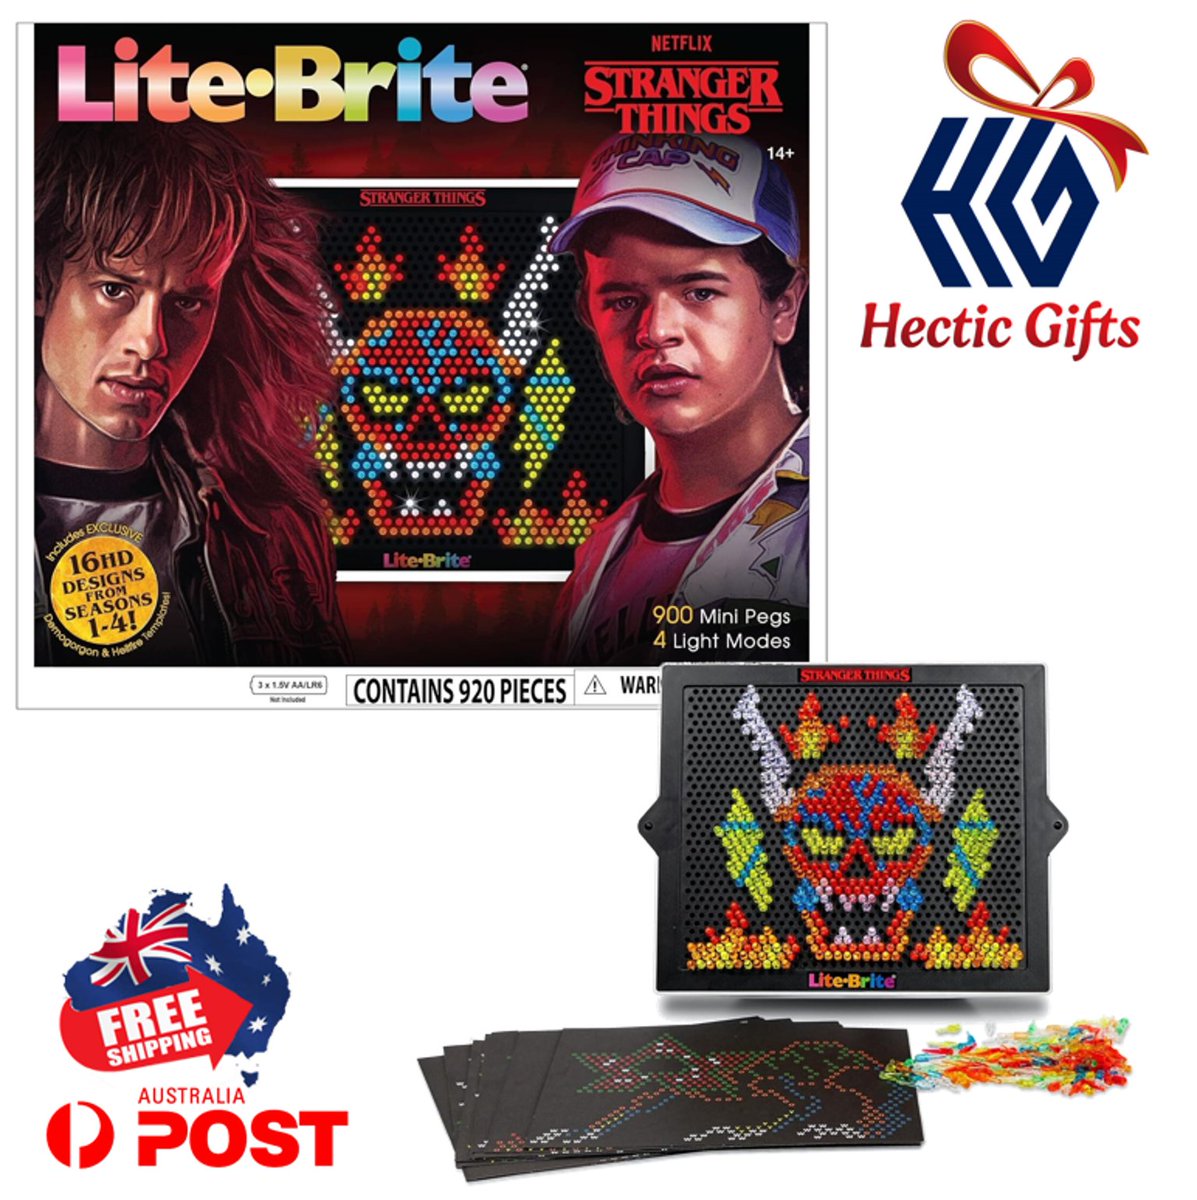 NEW – Lite Brite Stranger Things Special Edition - Demogorgon Hunters

ow.ly/vET450Qpq1f

#New #HecticGifts #BasicFun #LiteBrite #StrangerThings #Art #Toy #HighDefinition #LimitedEdition #Collectible #ArtWithLights #FreeShipping #AustraliaWide #FastShipping